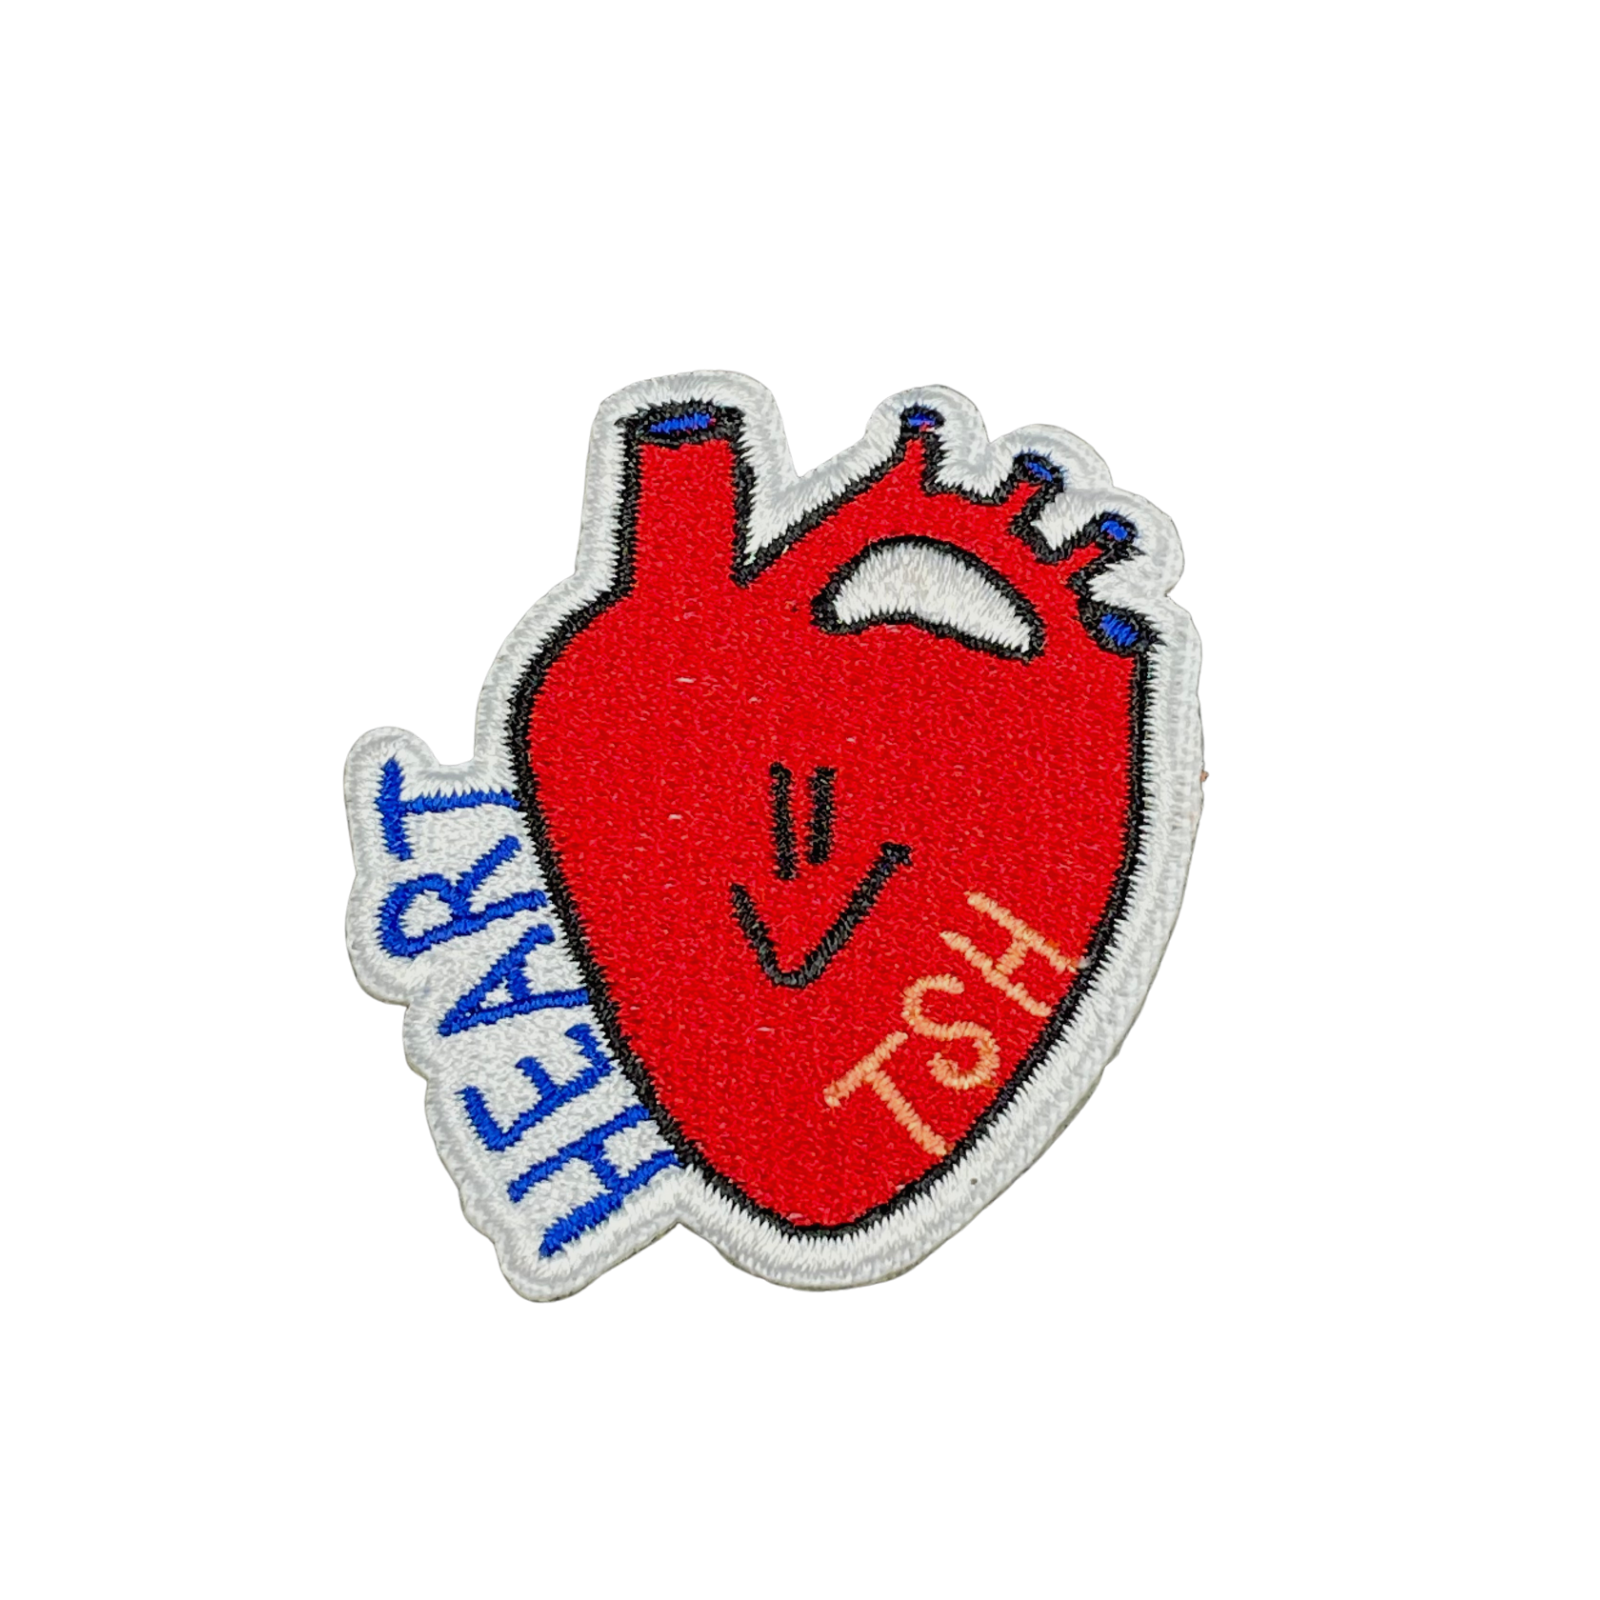 Cool Pups Iron-On Patches: Red Heart from United Pups